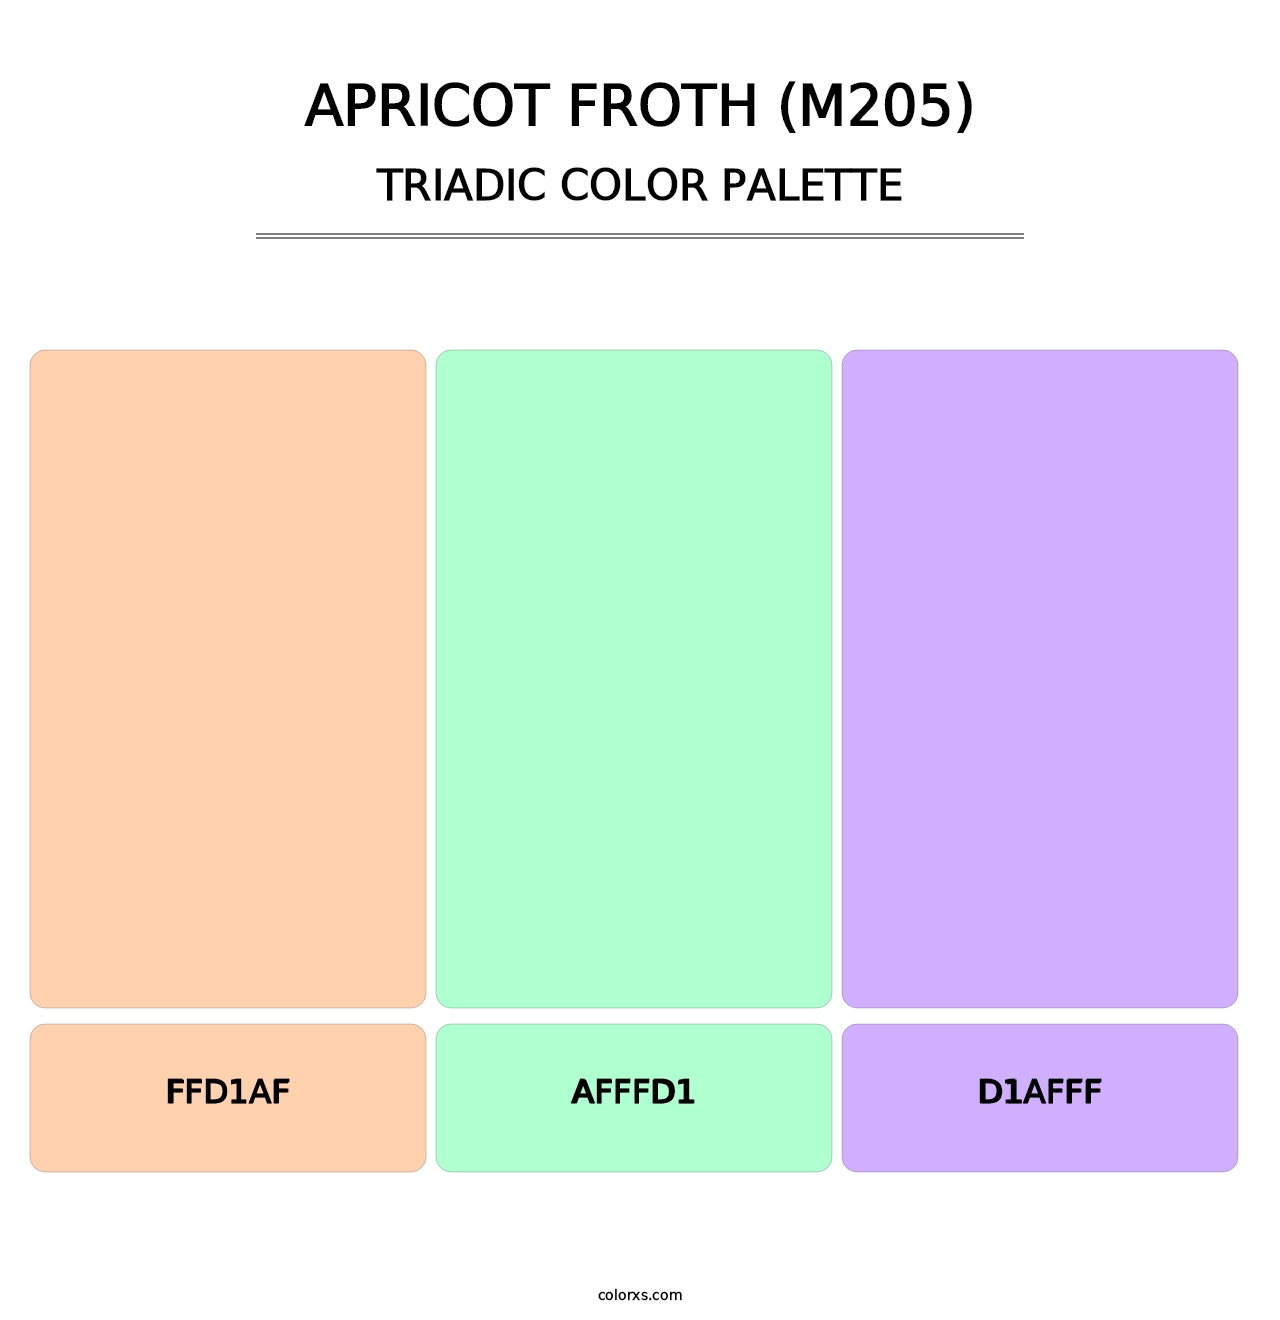 Apricot Froth (M205) - Triadic Color Palette